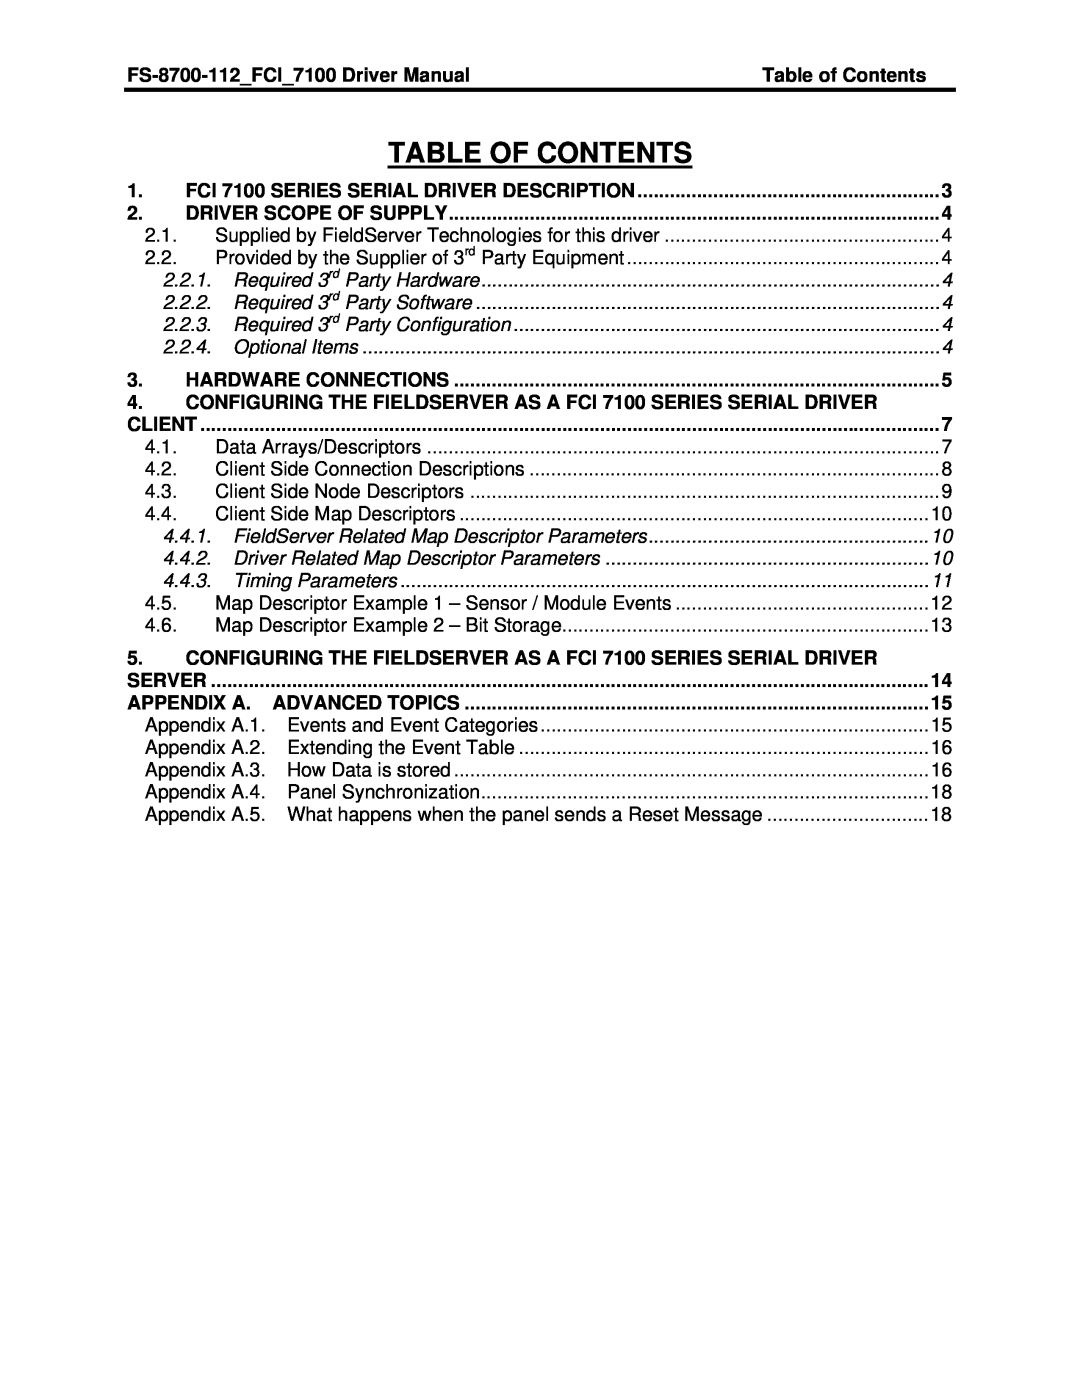 FieldServer Table Of Contents, FS-8700-112FCI7100 Driver Manual, Table of Contents, Driver Scope Of Supply, Client 